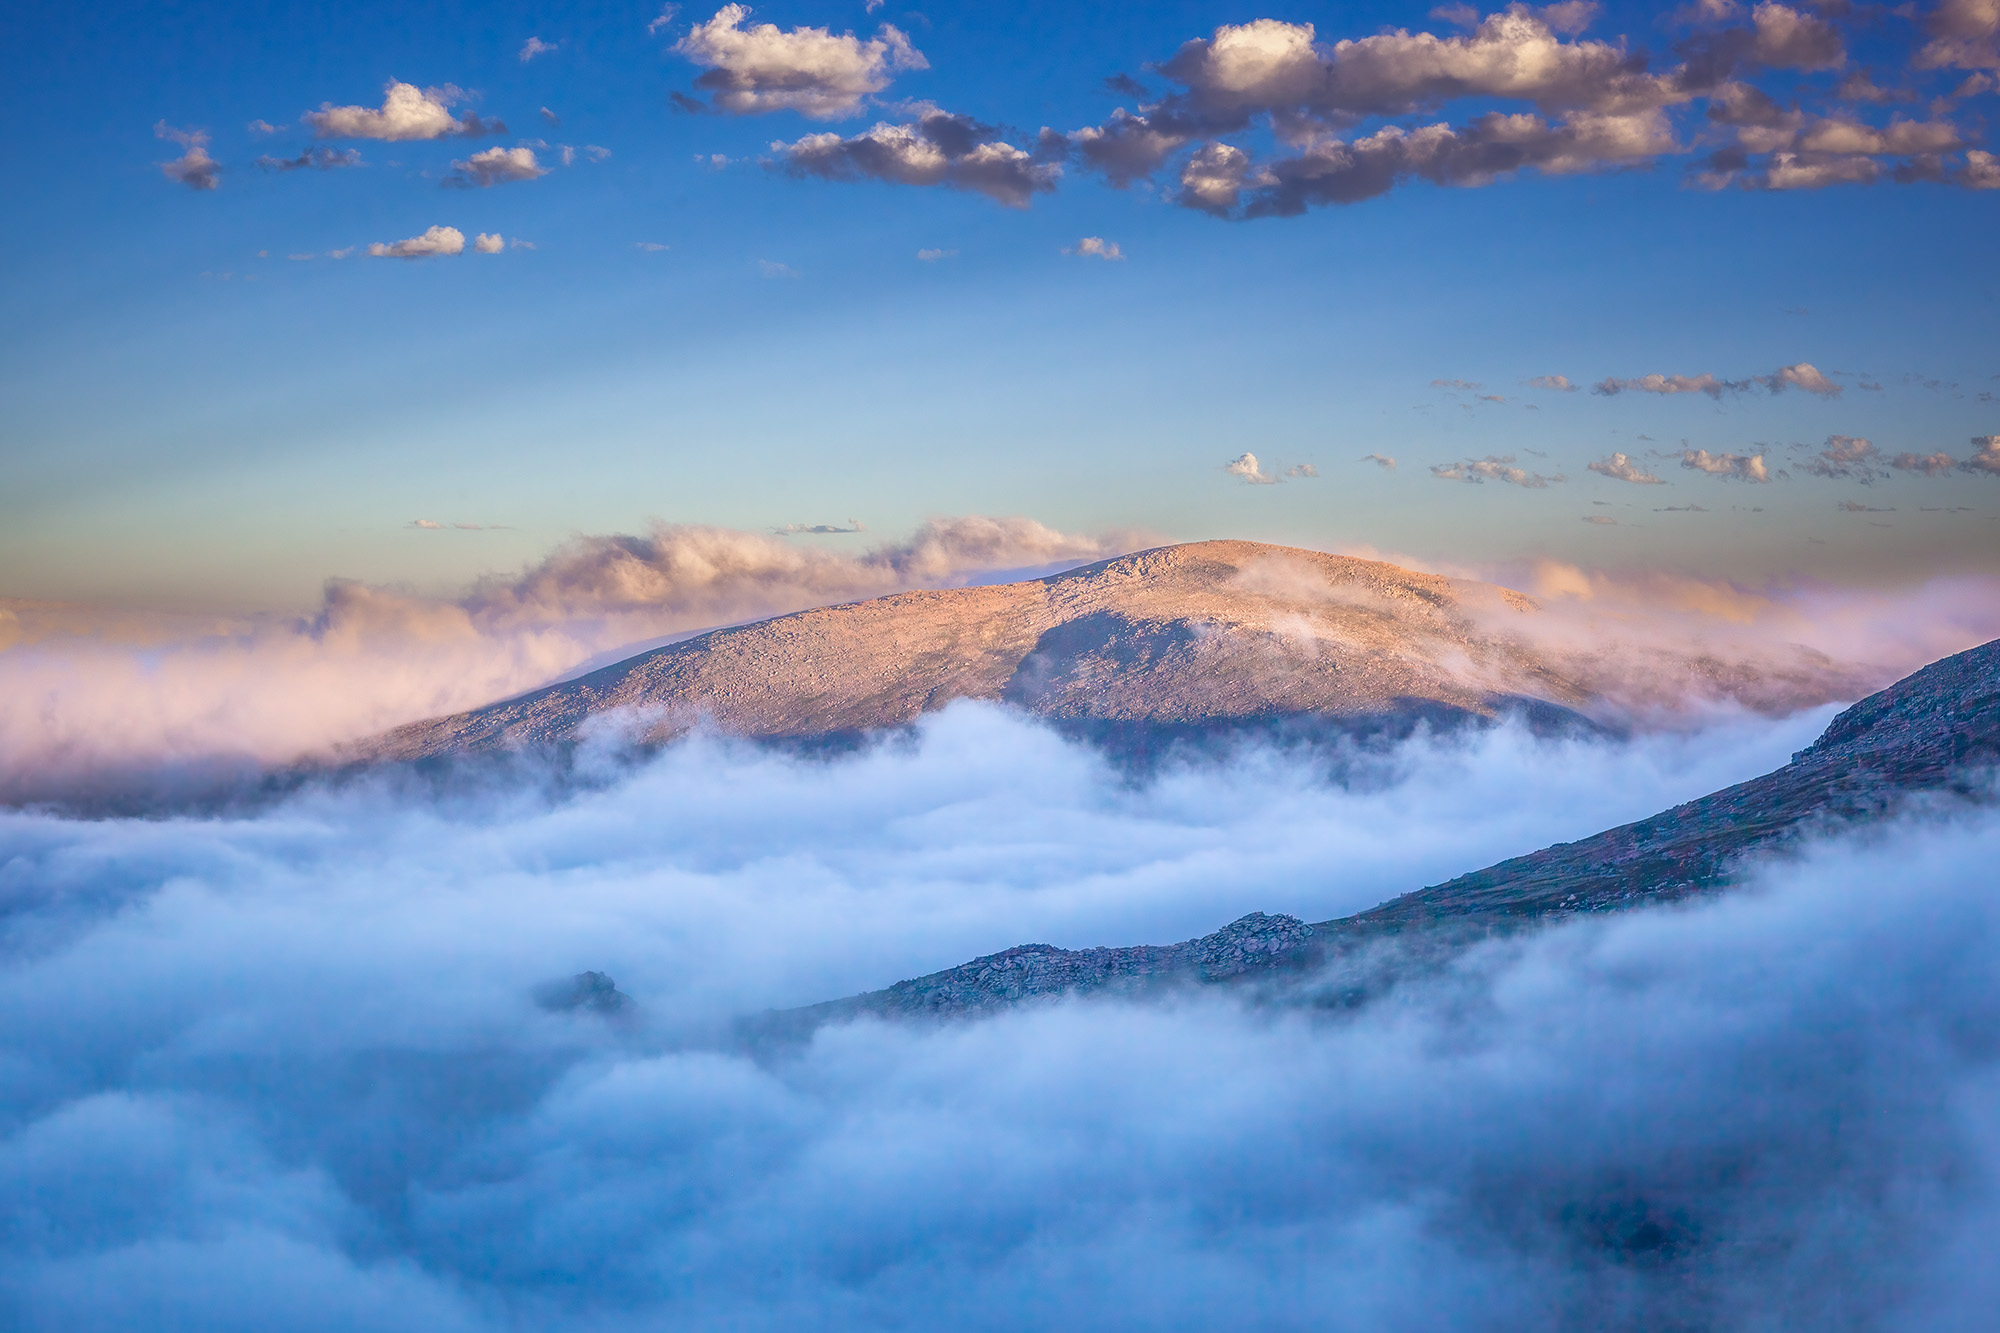 This image, captured from the summit of Mount Evans in Colorado, reveals a breathtaking perspective. Here, we soar above the...